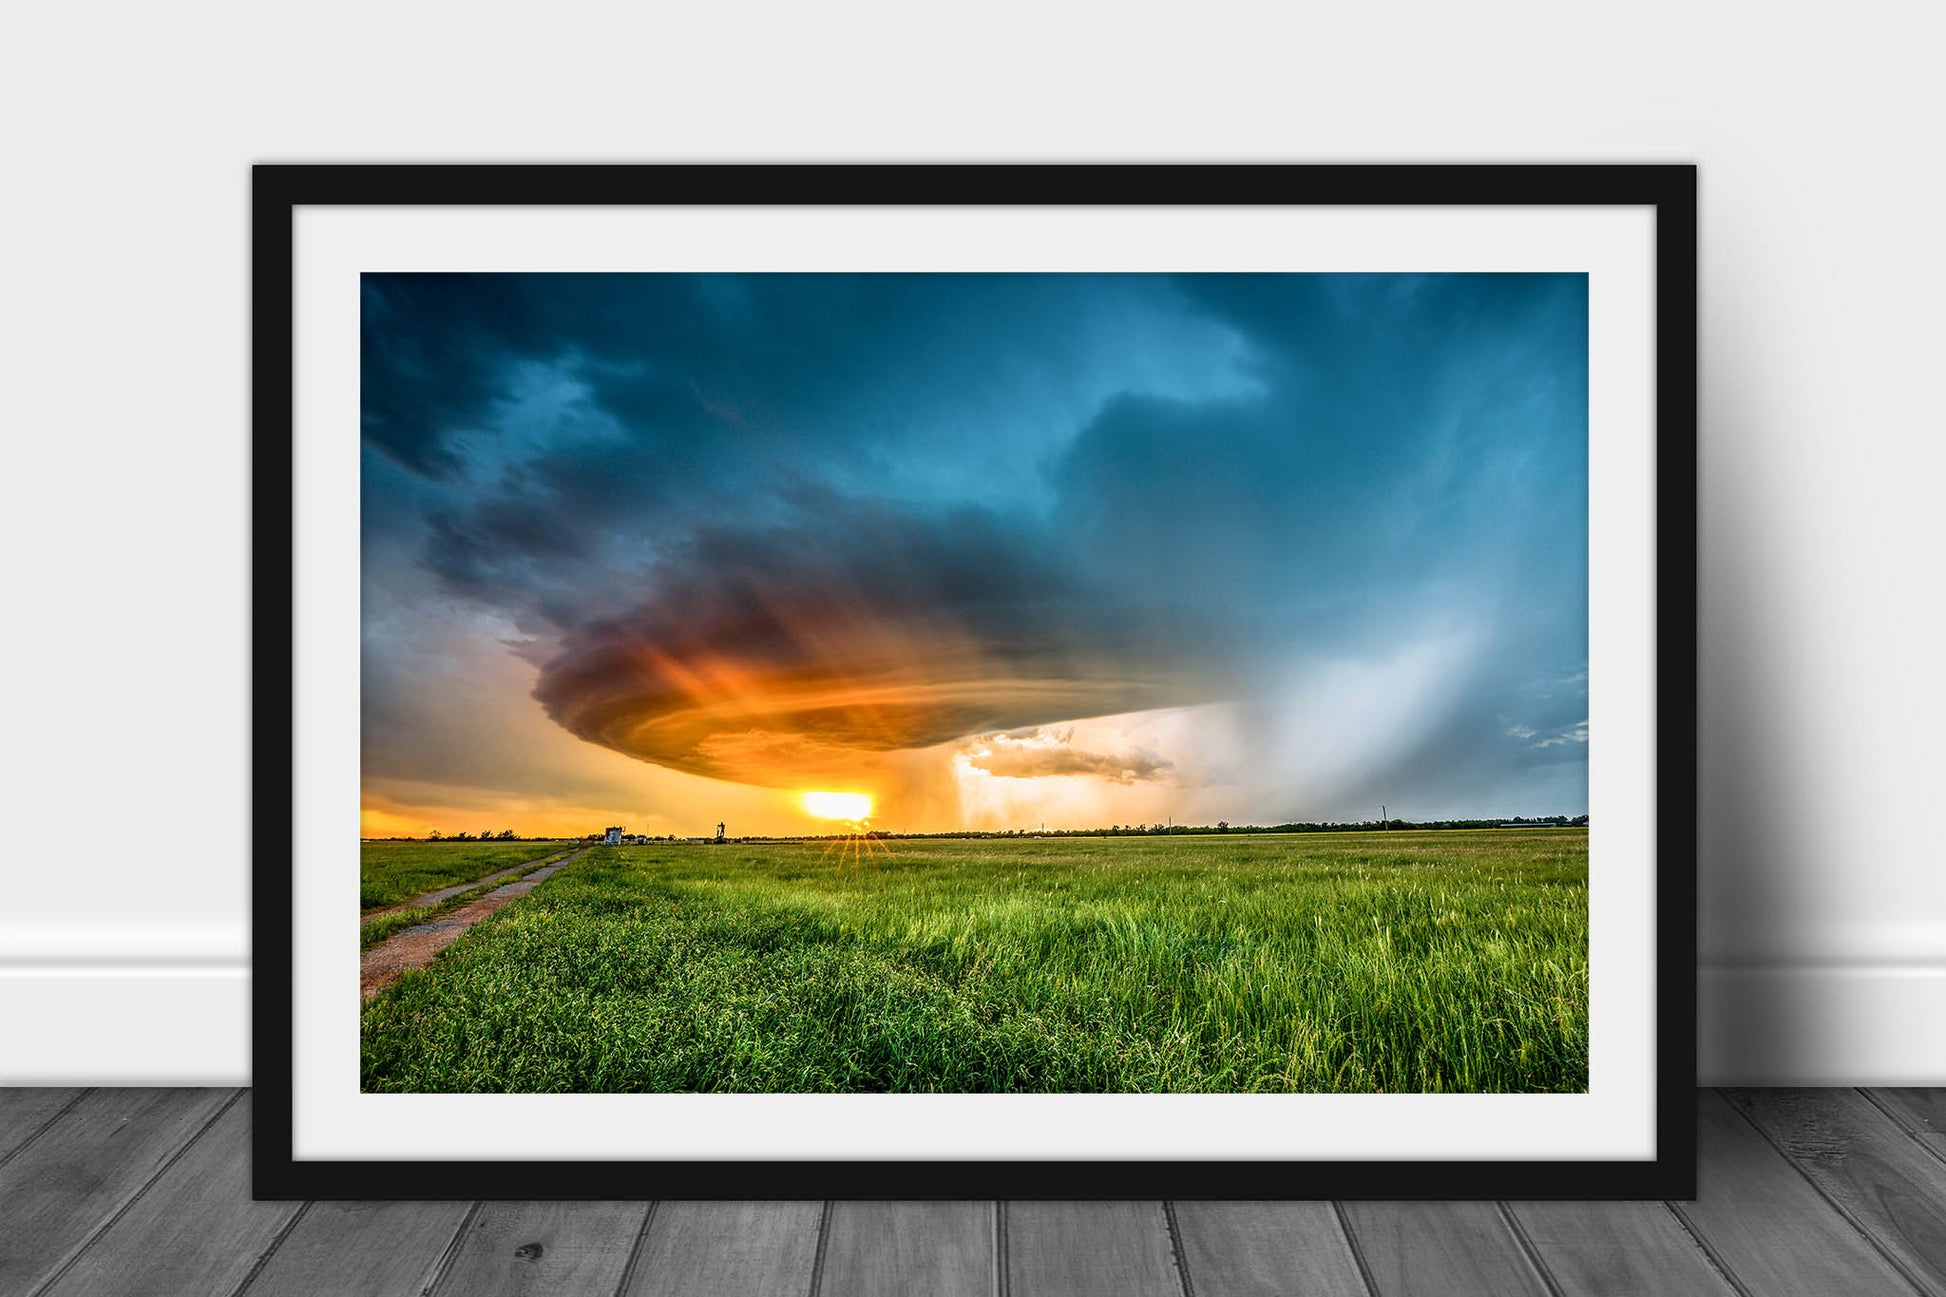 Framed and matted storm photography print of a thunderstorm illuminated by sunlight over a field at sunset on a spring evening in Oklahoma by Sean Ramsey of Southern Plains Photography.